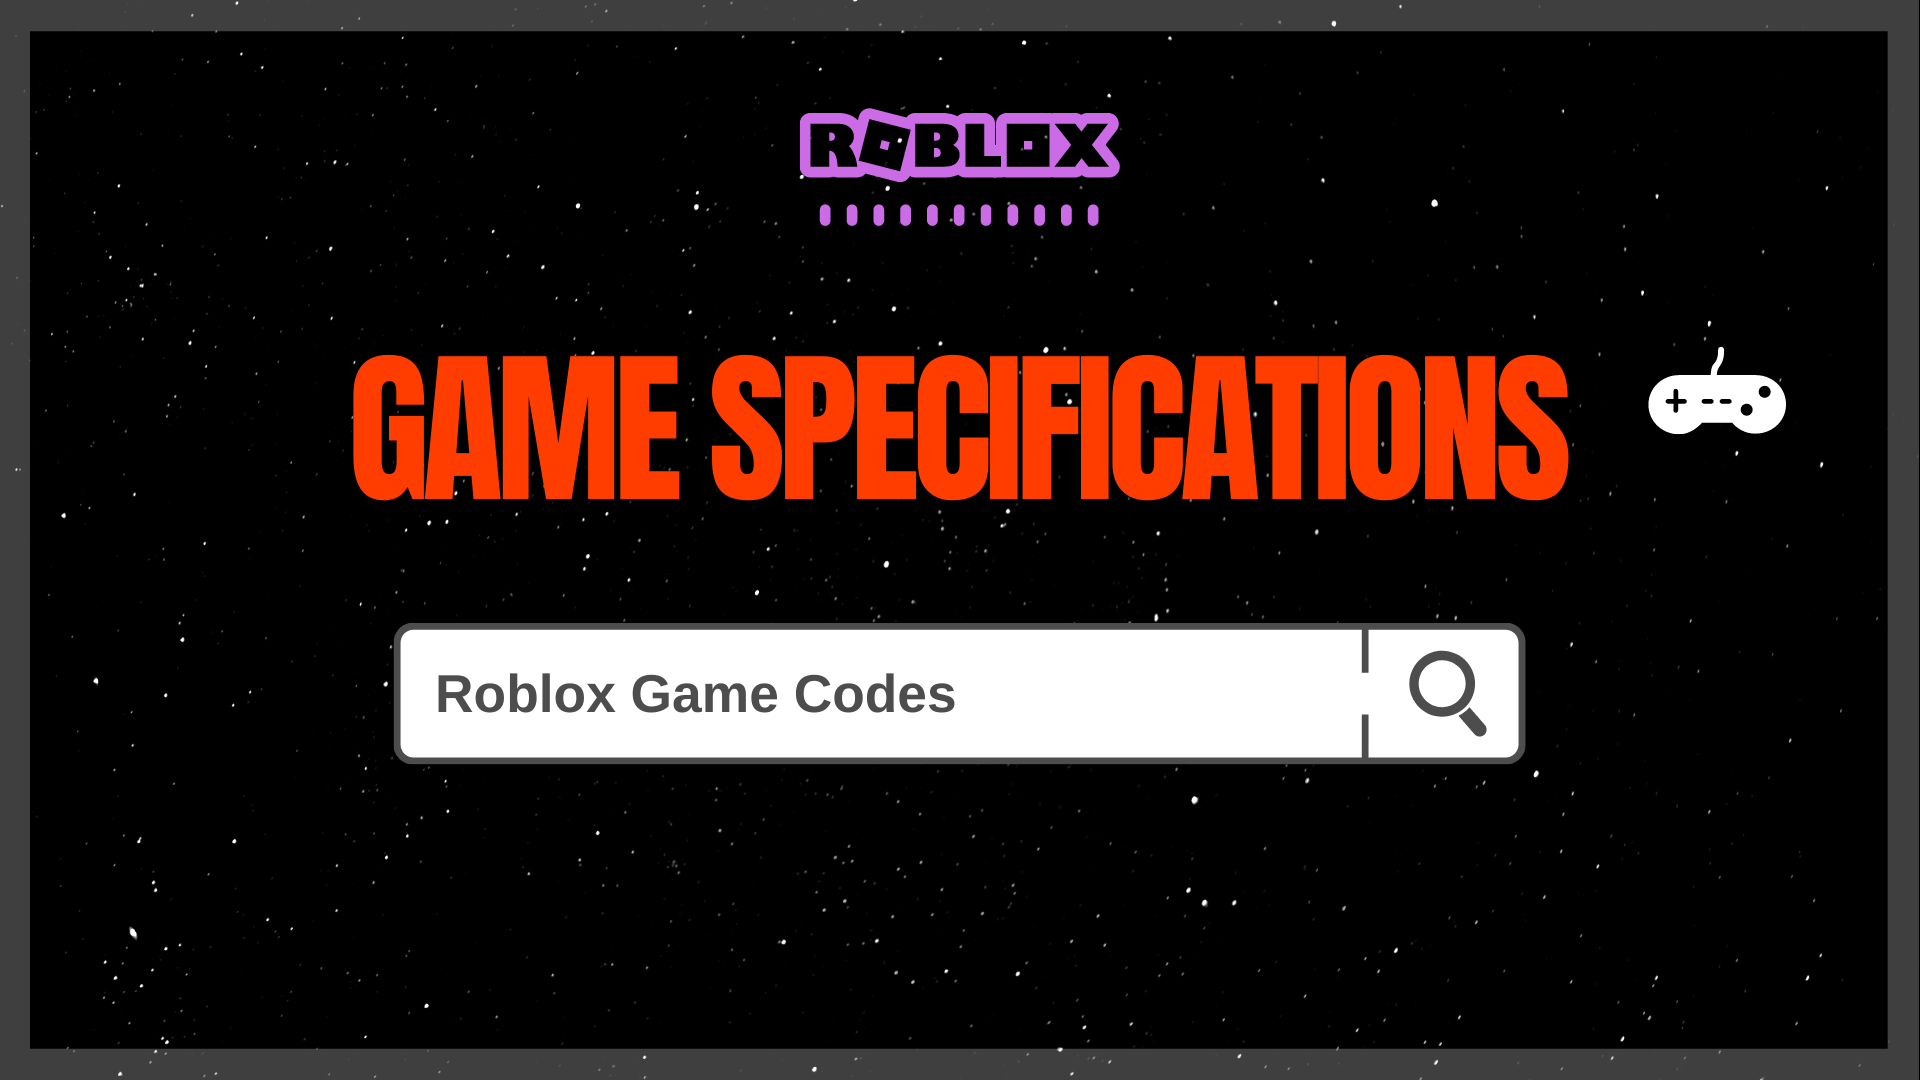 All In One Roblox Game Codes ᐈ Encylopedia Game Specifications - prison escape simulator roblox codes